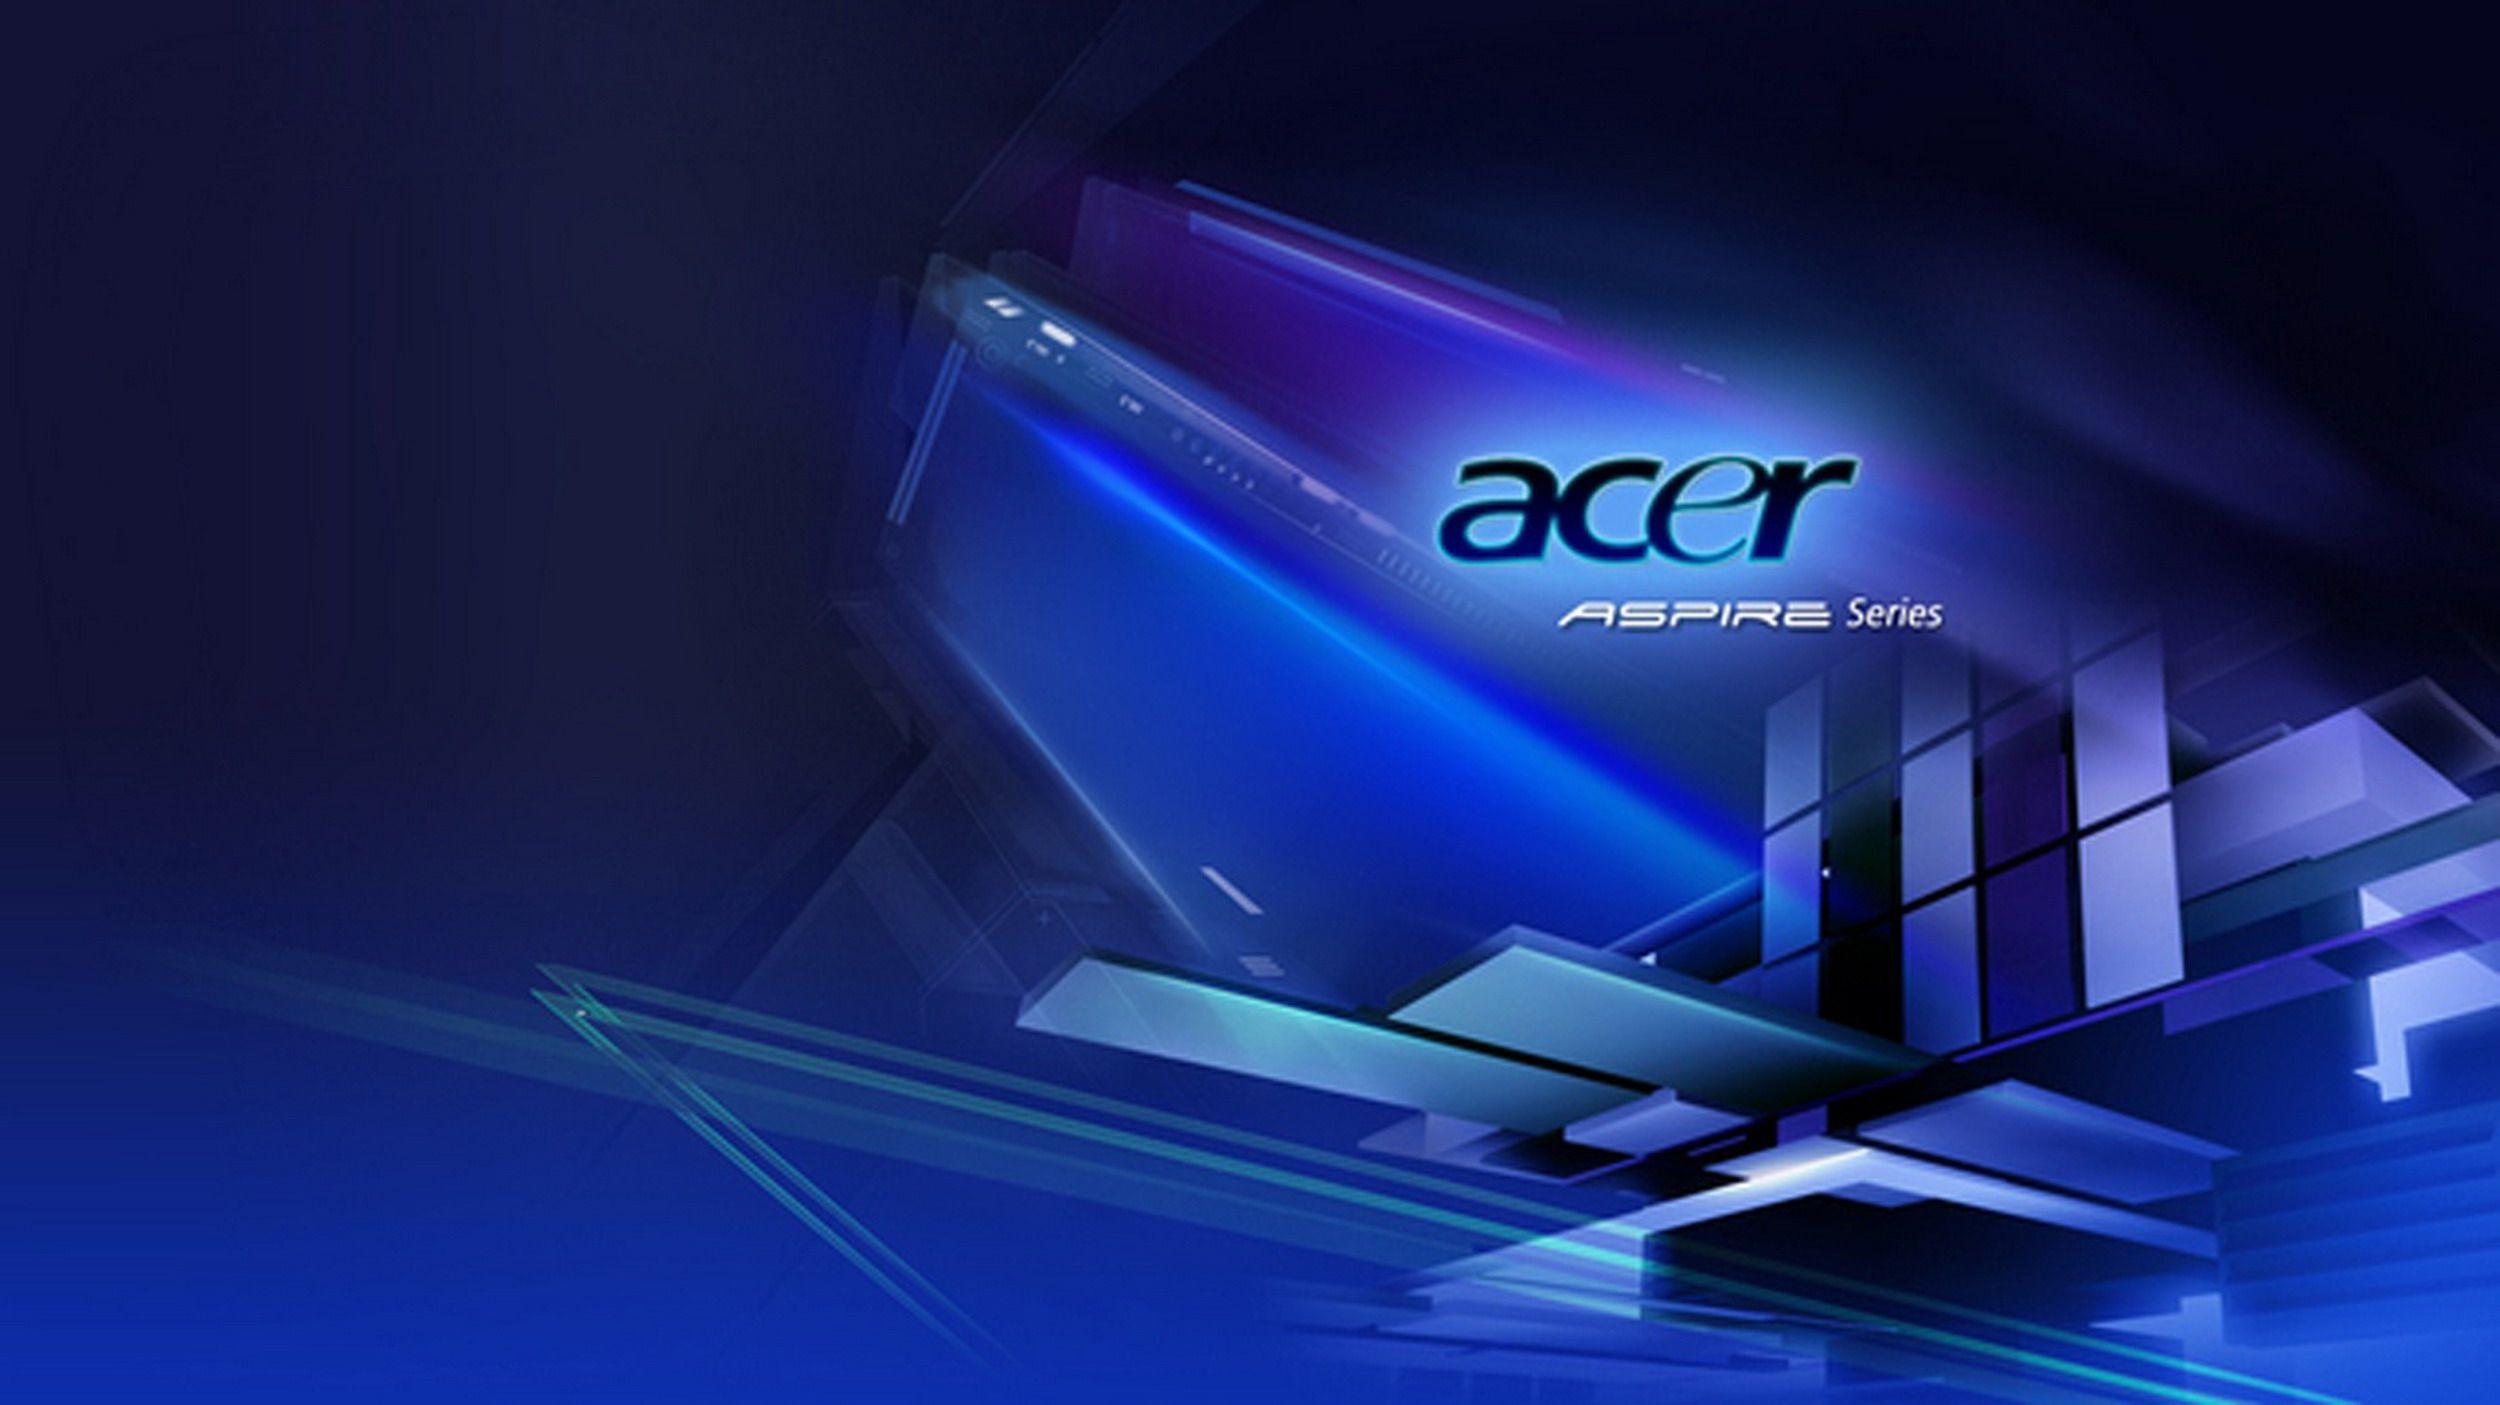 acer wallpapers for windows 7 free download